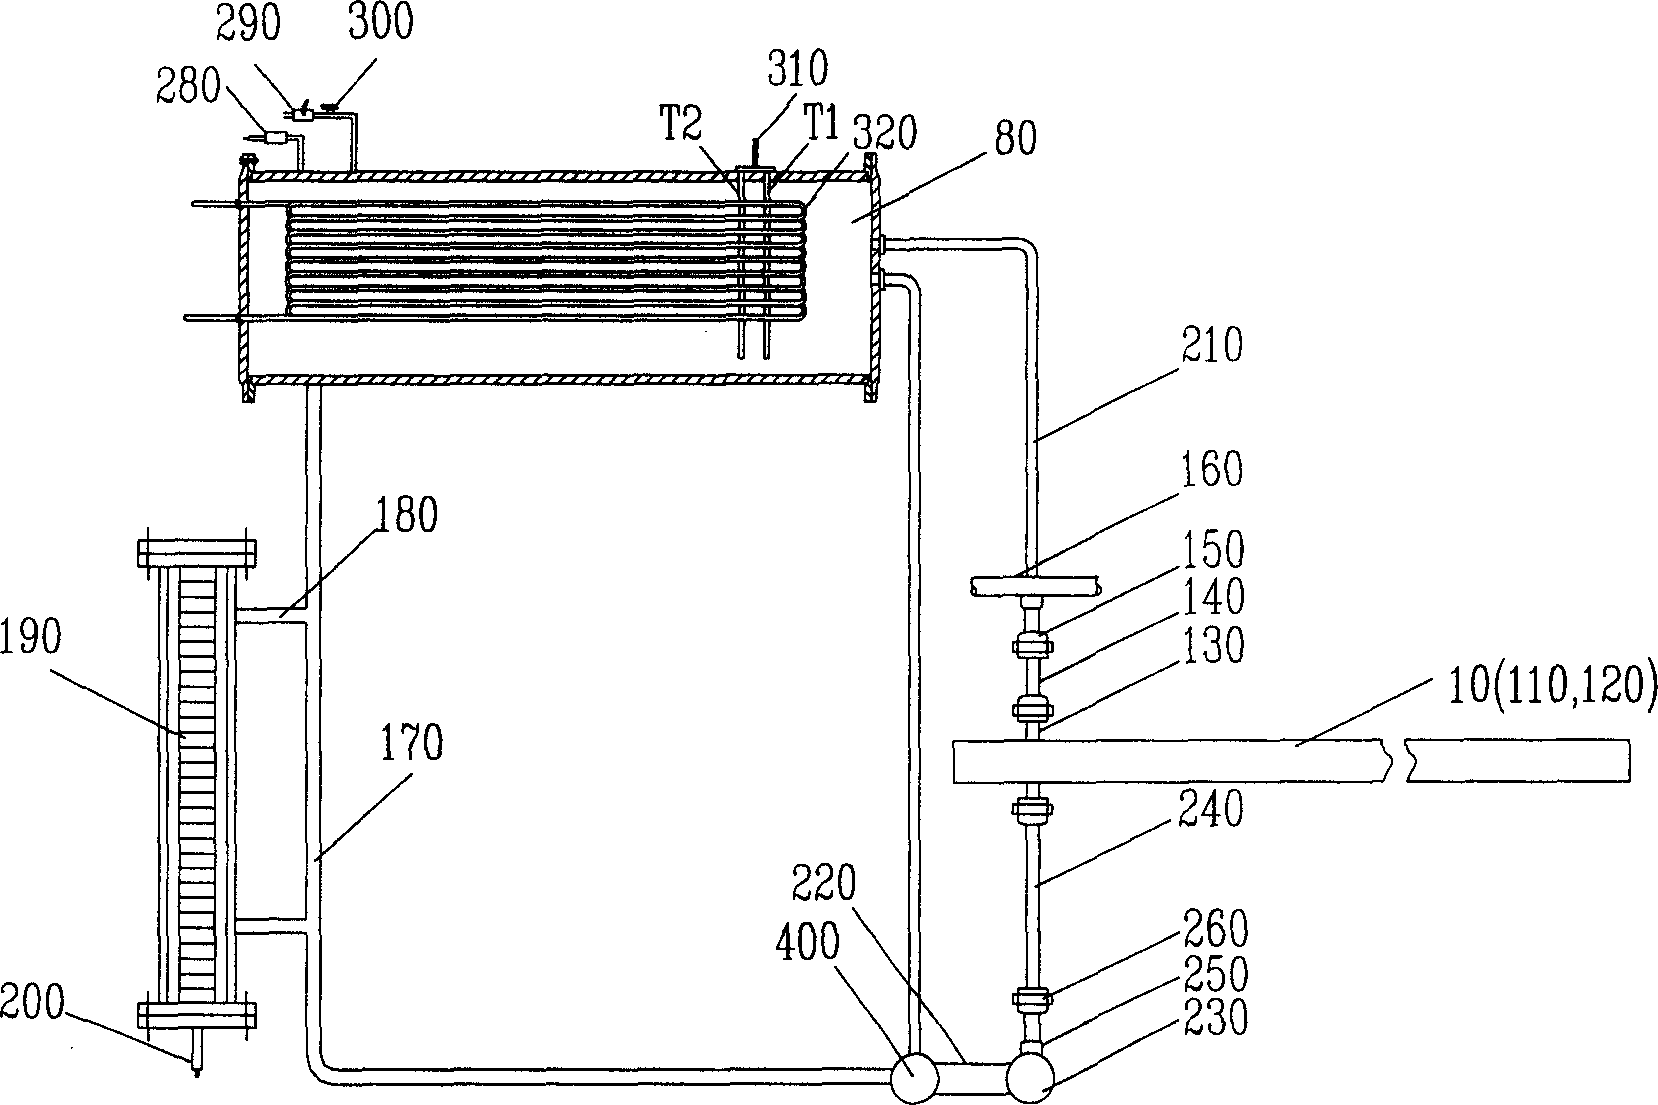 Self-circulation cooling loop of heavy current fixture wire